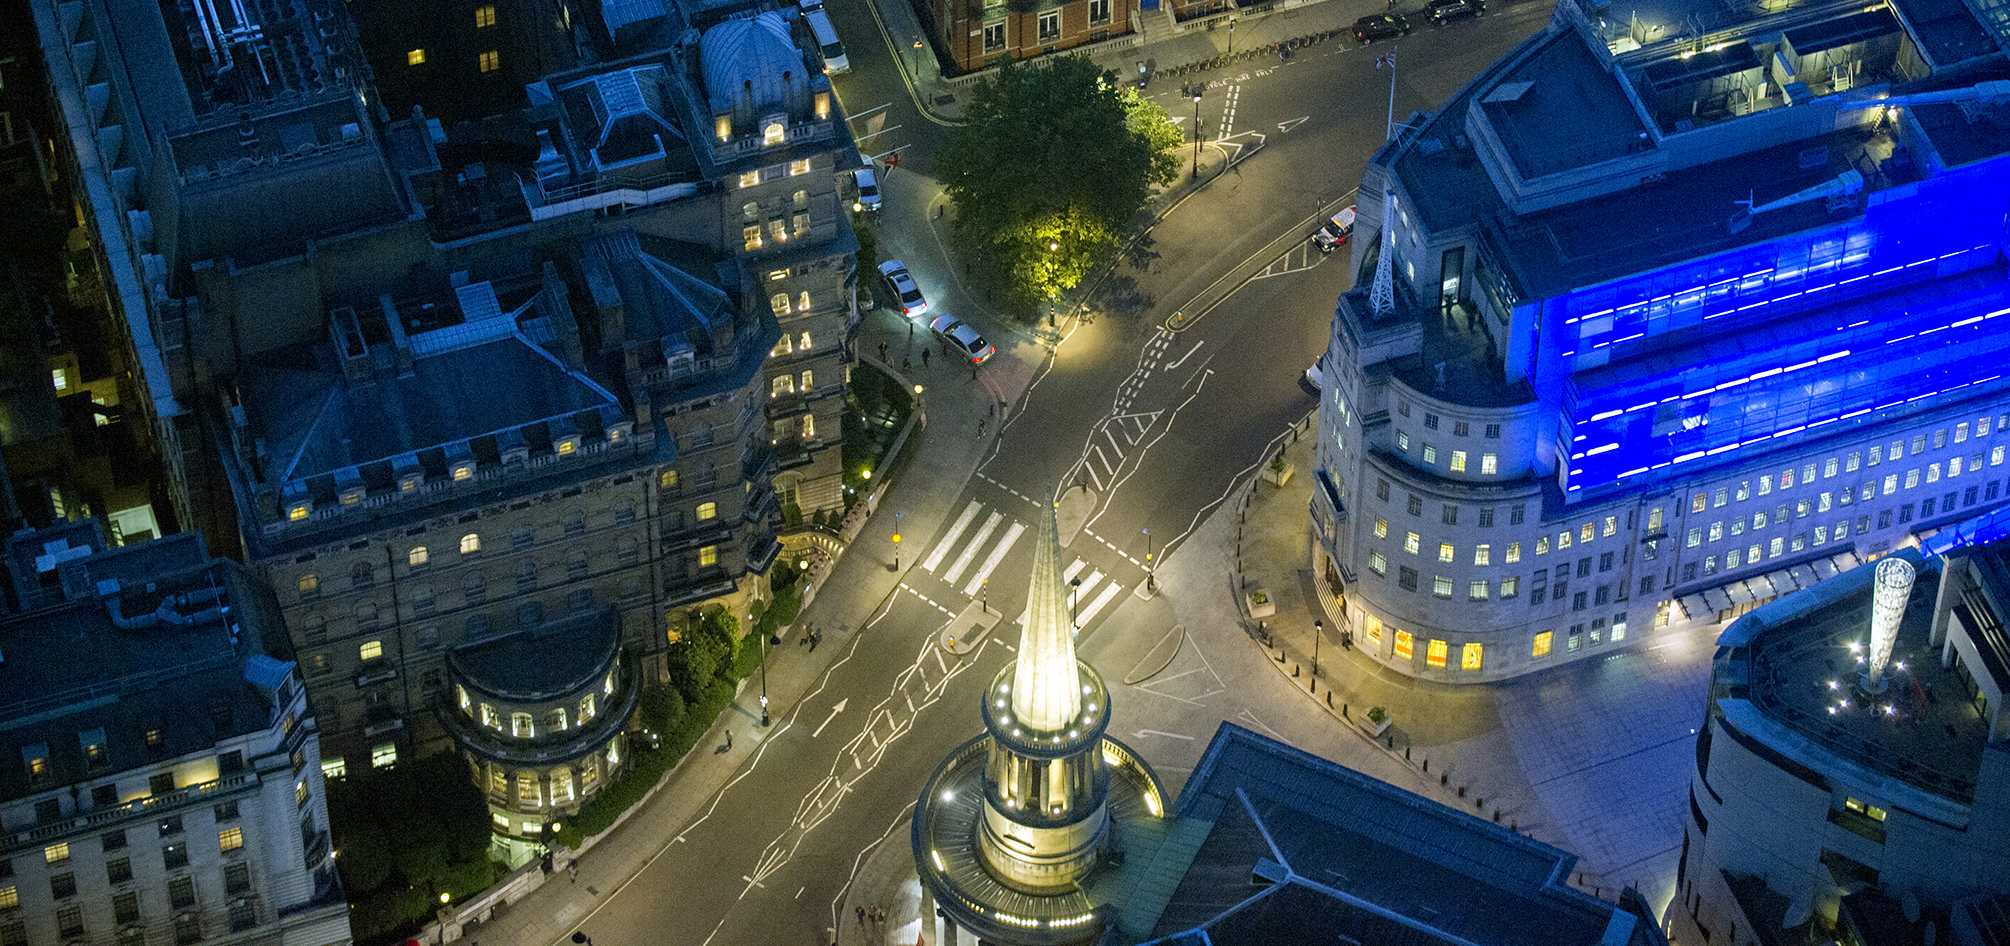 Evenings on Regent Street, the brightly lit streets of London invite you to admire the city’s beautiful architecture.